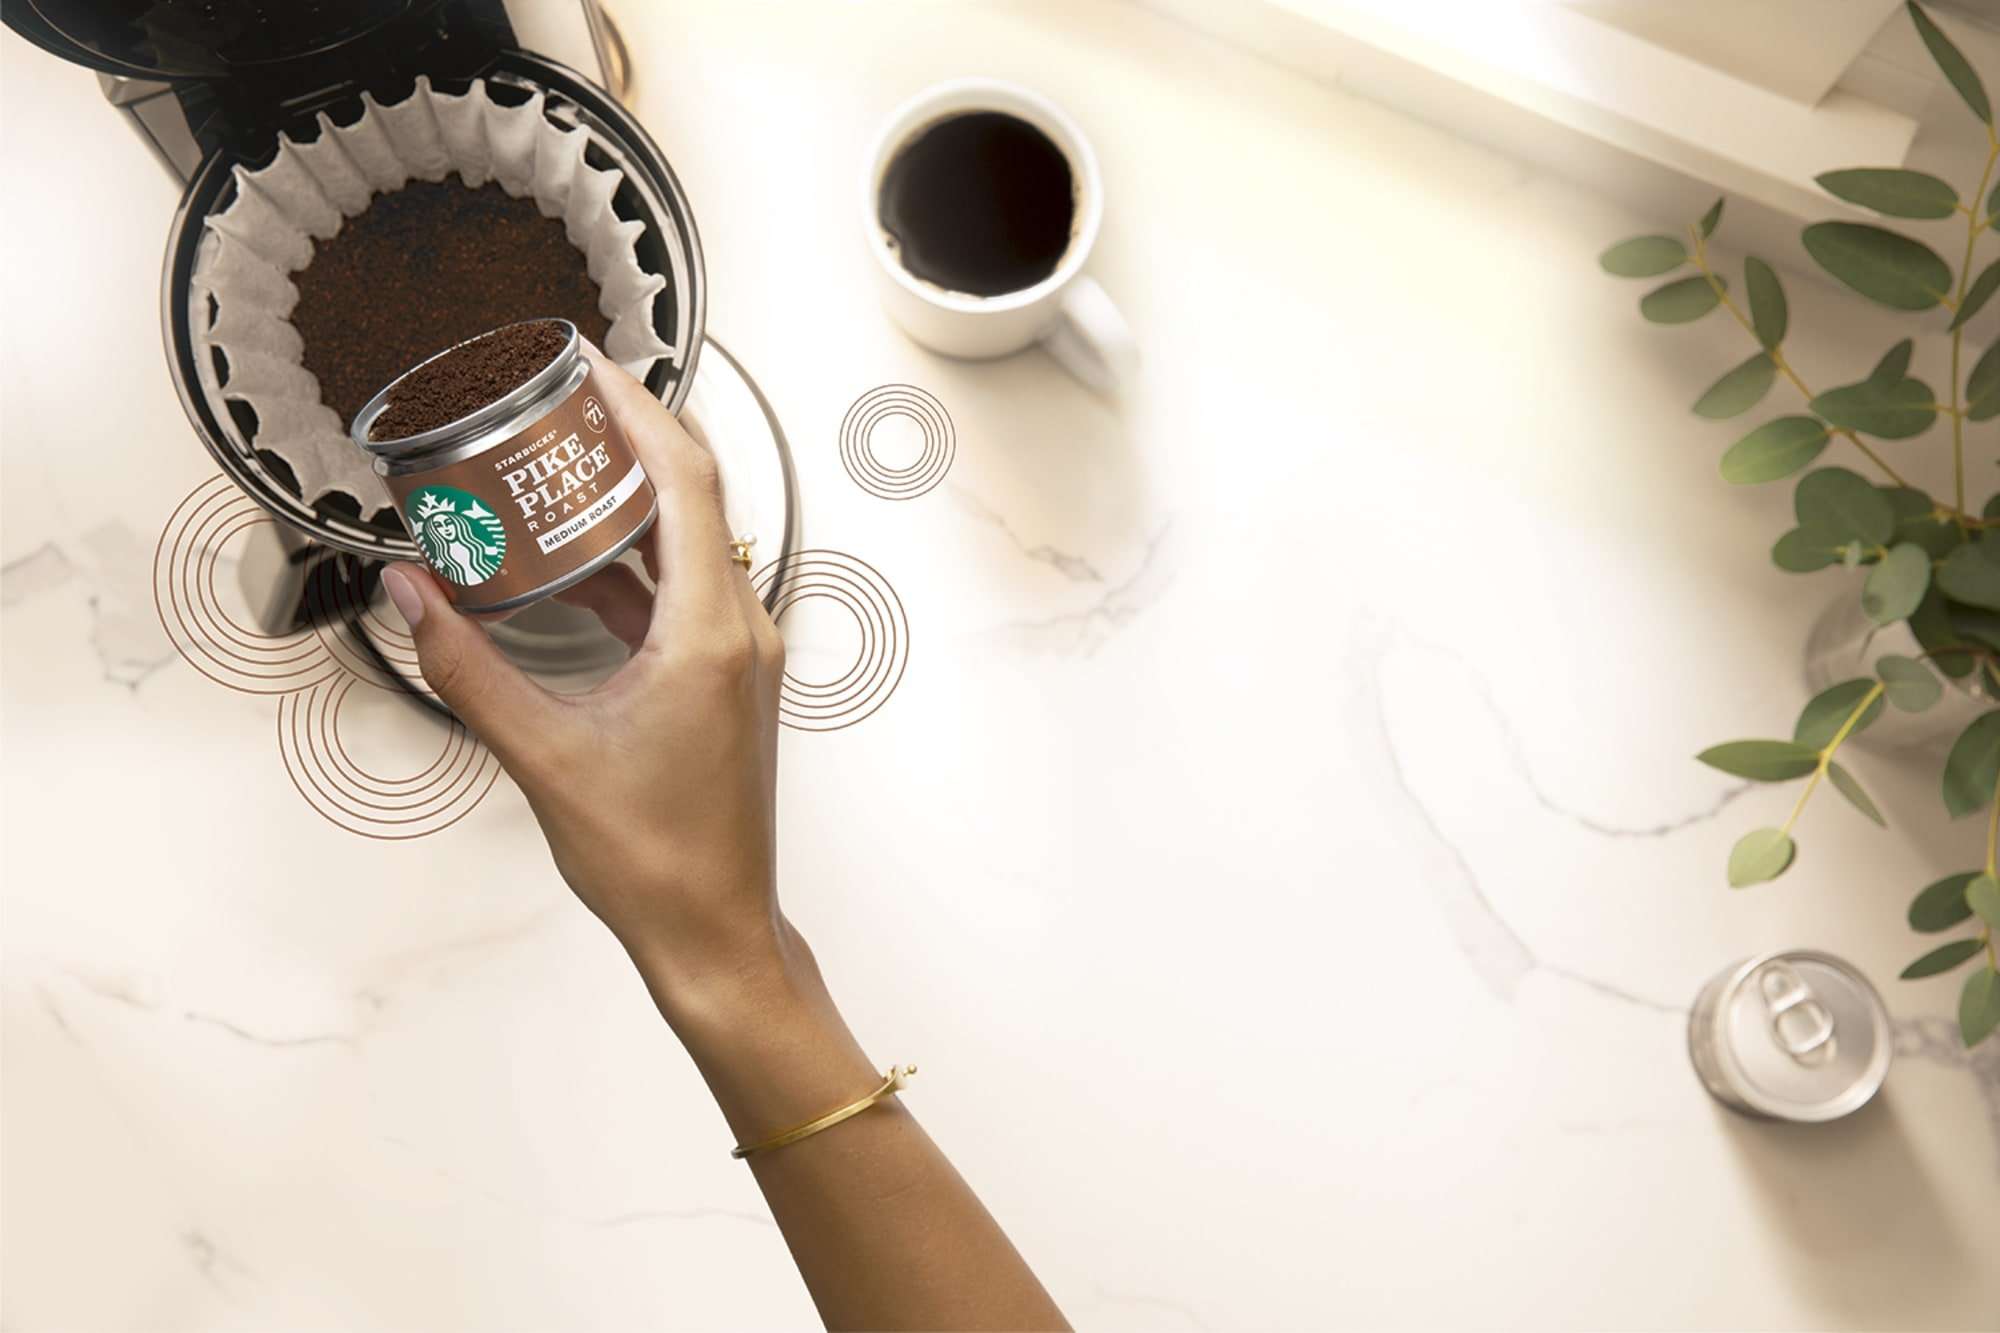 Starbucks wants to help you make quality coffee at home ...